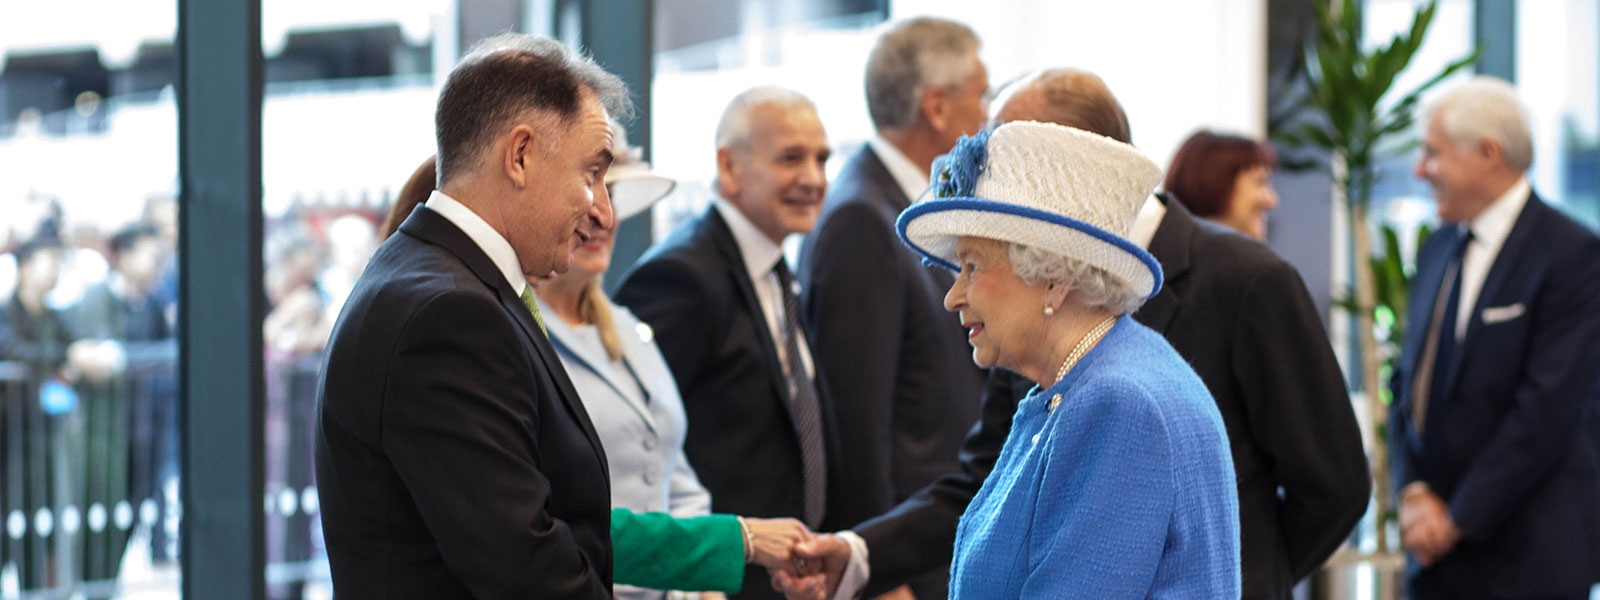 The Principal meets The Queen as she arrives at the Technology & Innovation Centre.